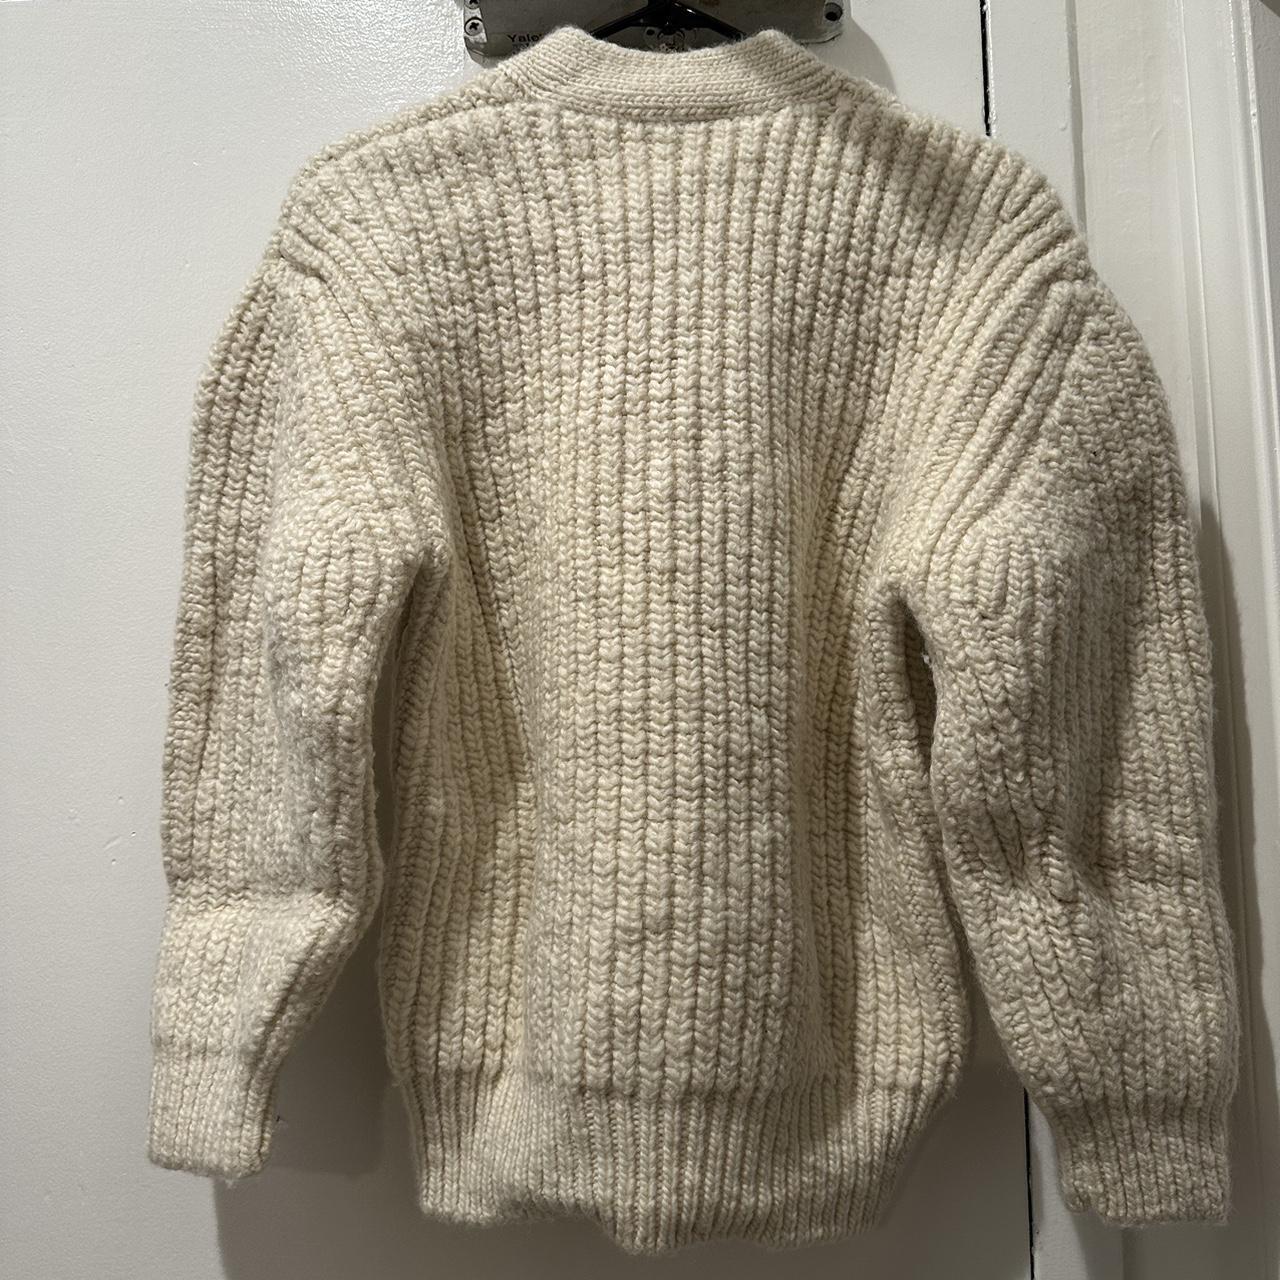 Lemaire Chunky Knit Cardigan Purchased from DSM... - Depop